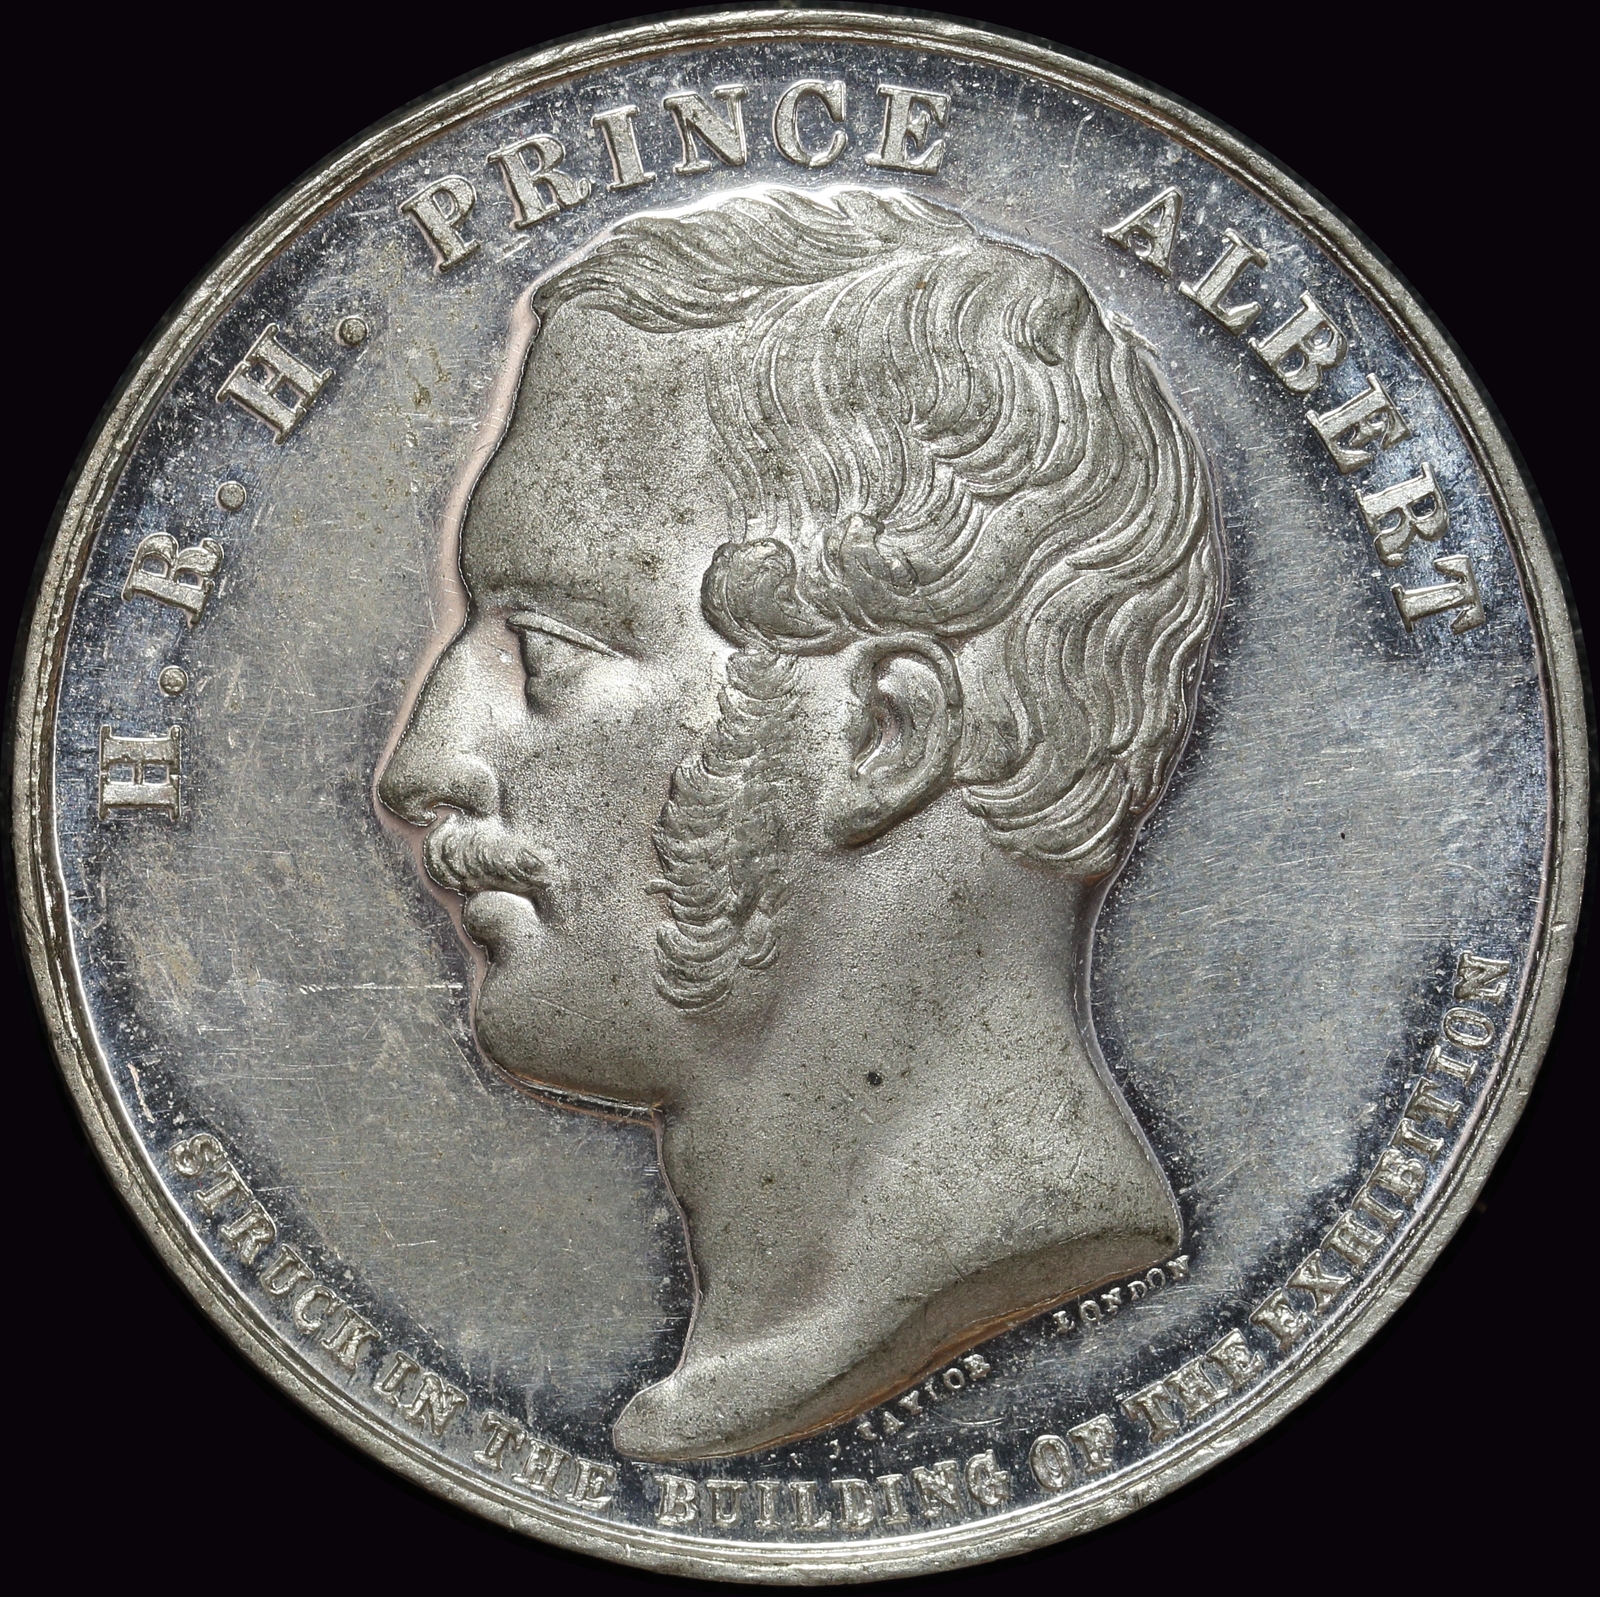 United Kingdom 1851 White Metal Medallion by WJ Taylor for Great Exhibition London product image